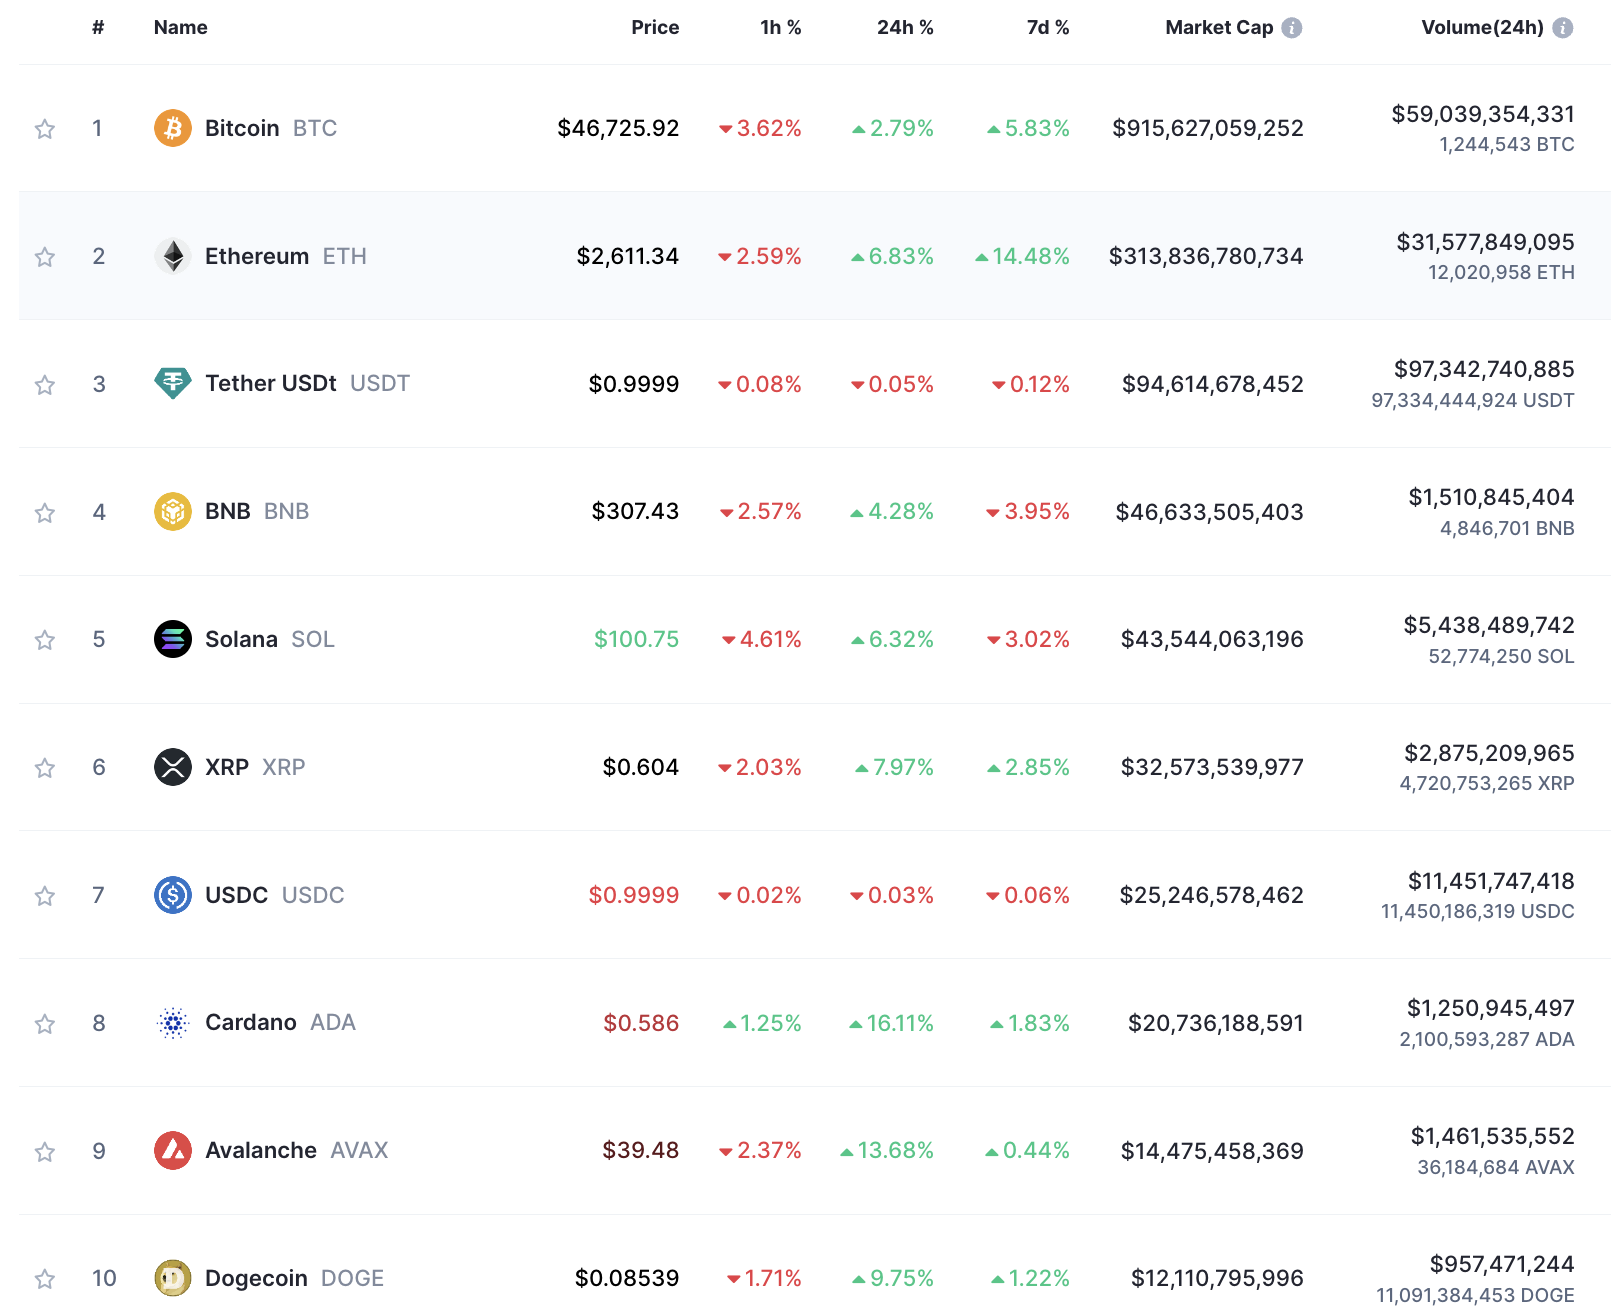 Performance of top cryptocurrencies by market capitalization